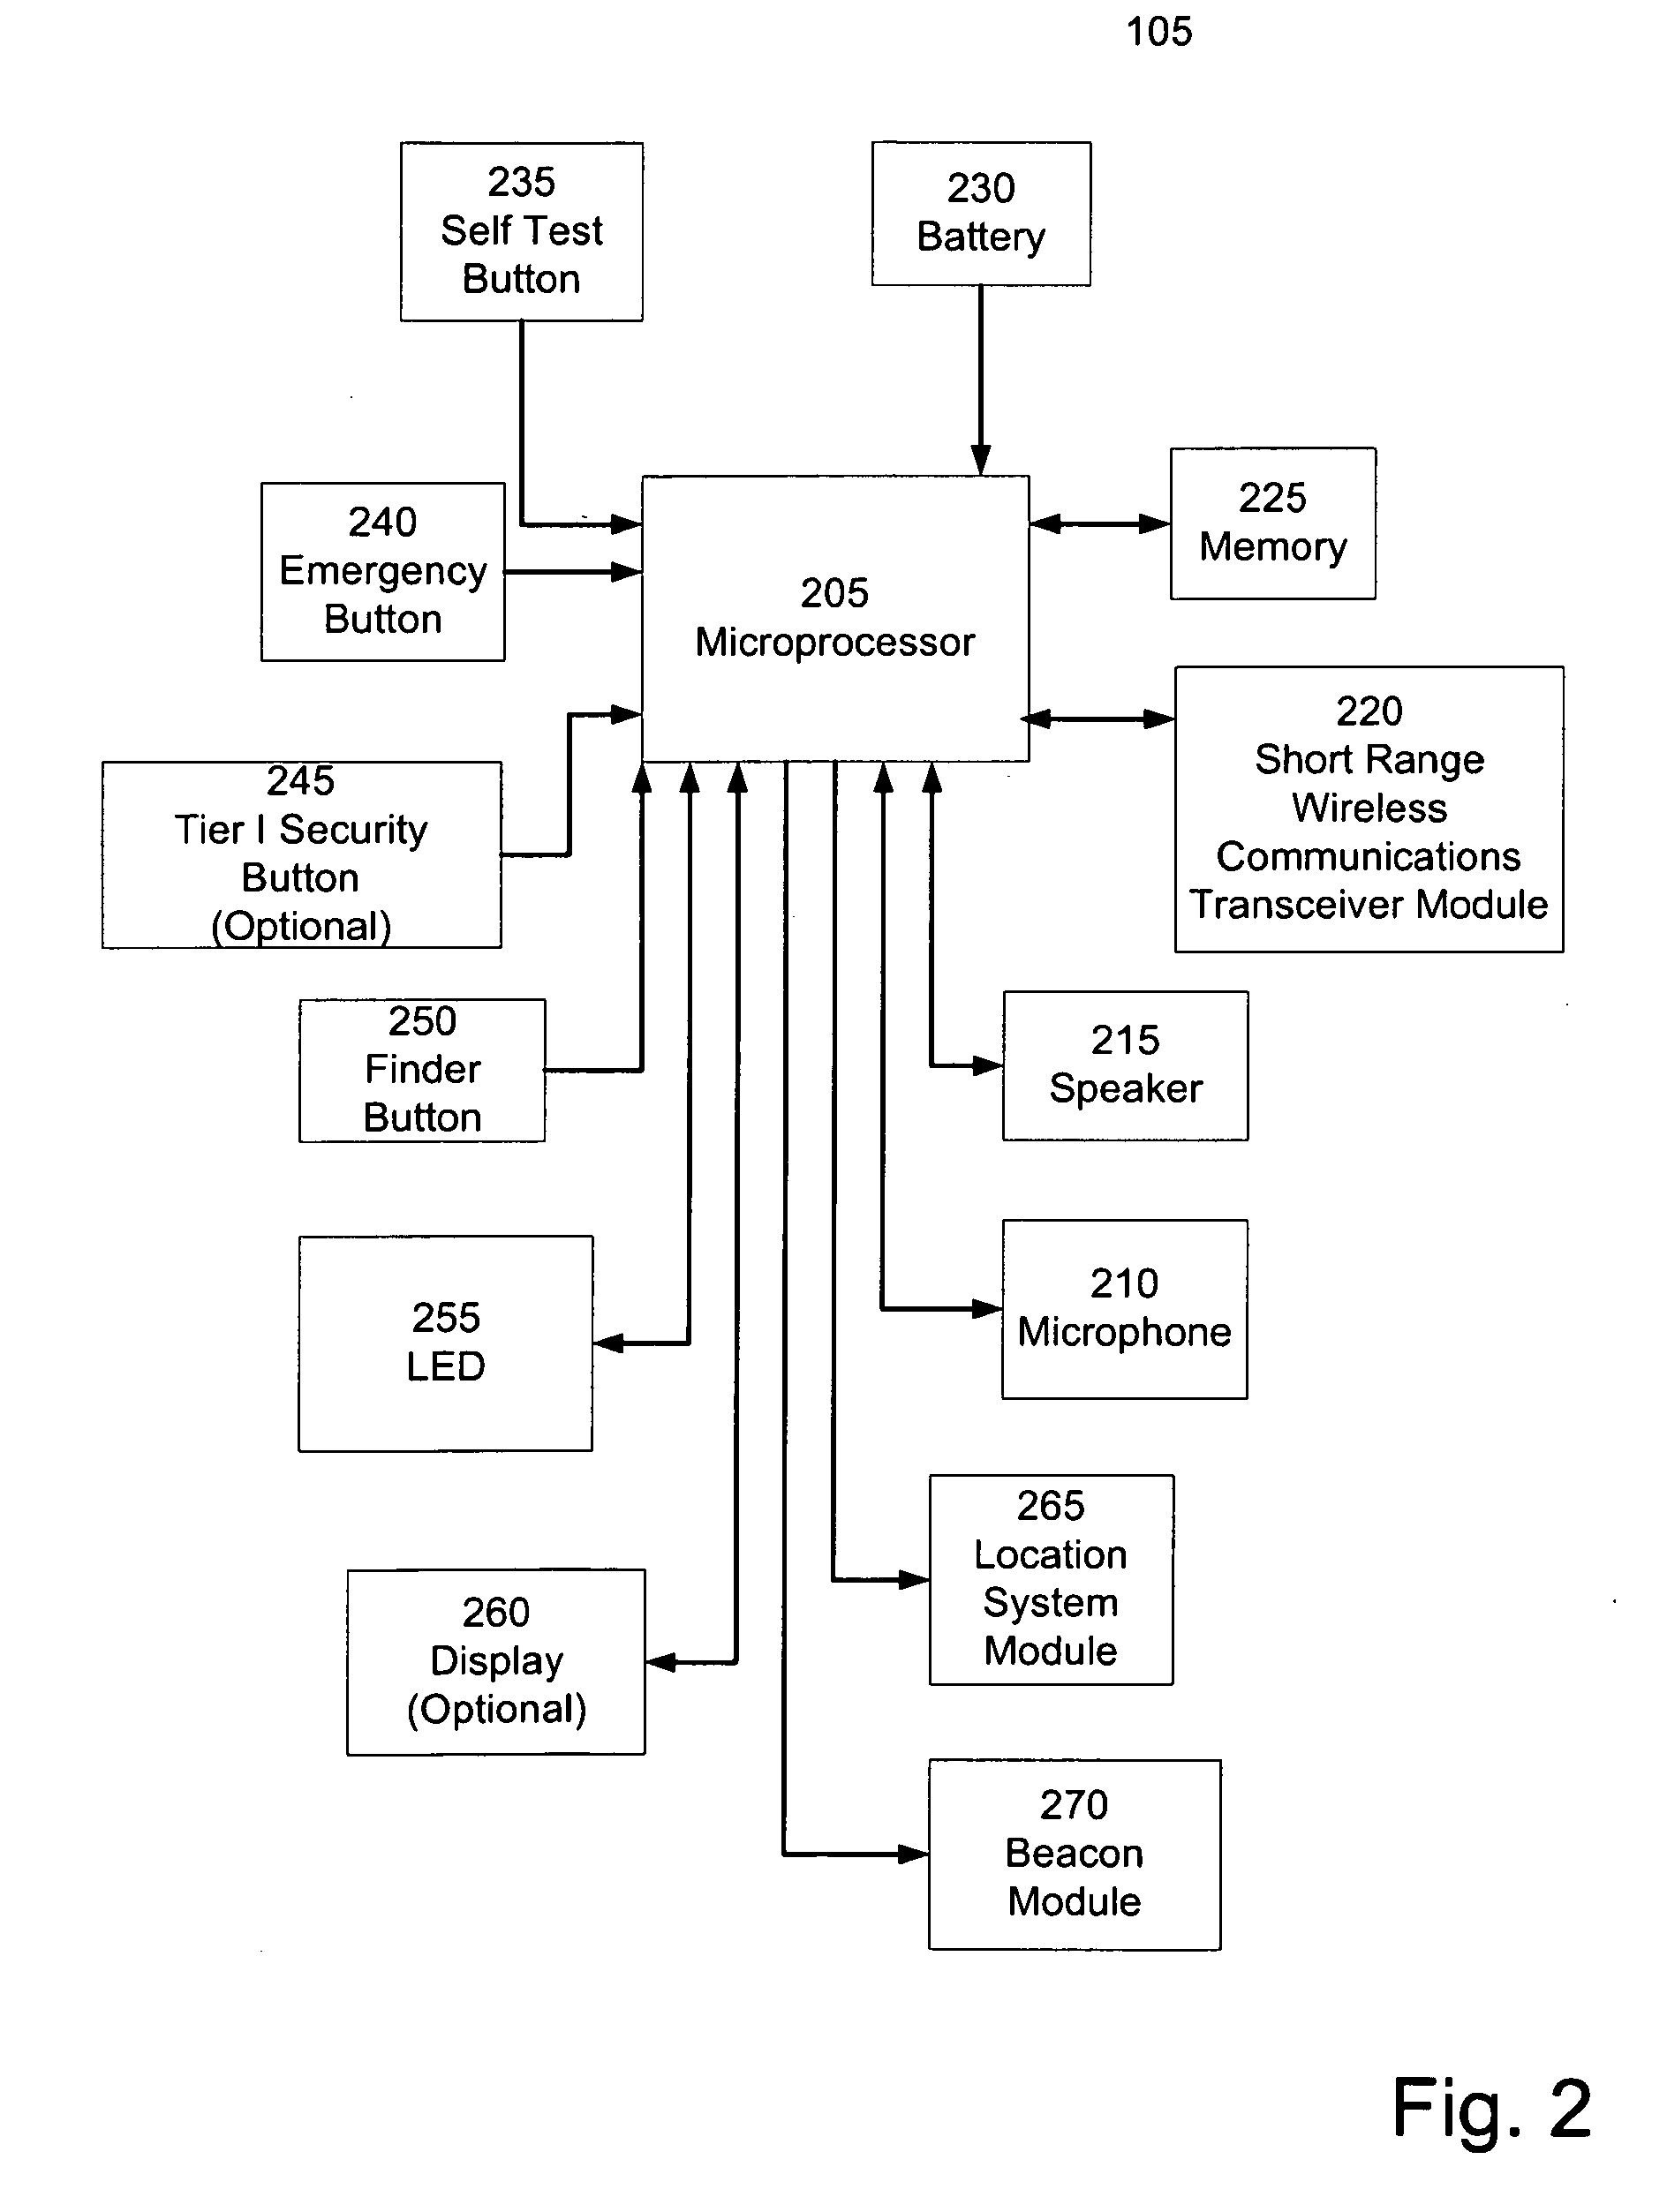 Method and system for mobile personal emergency response